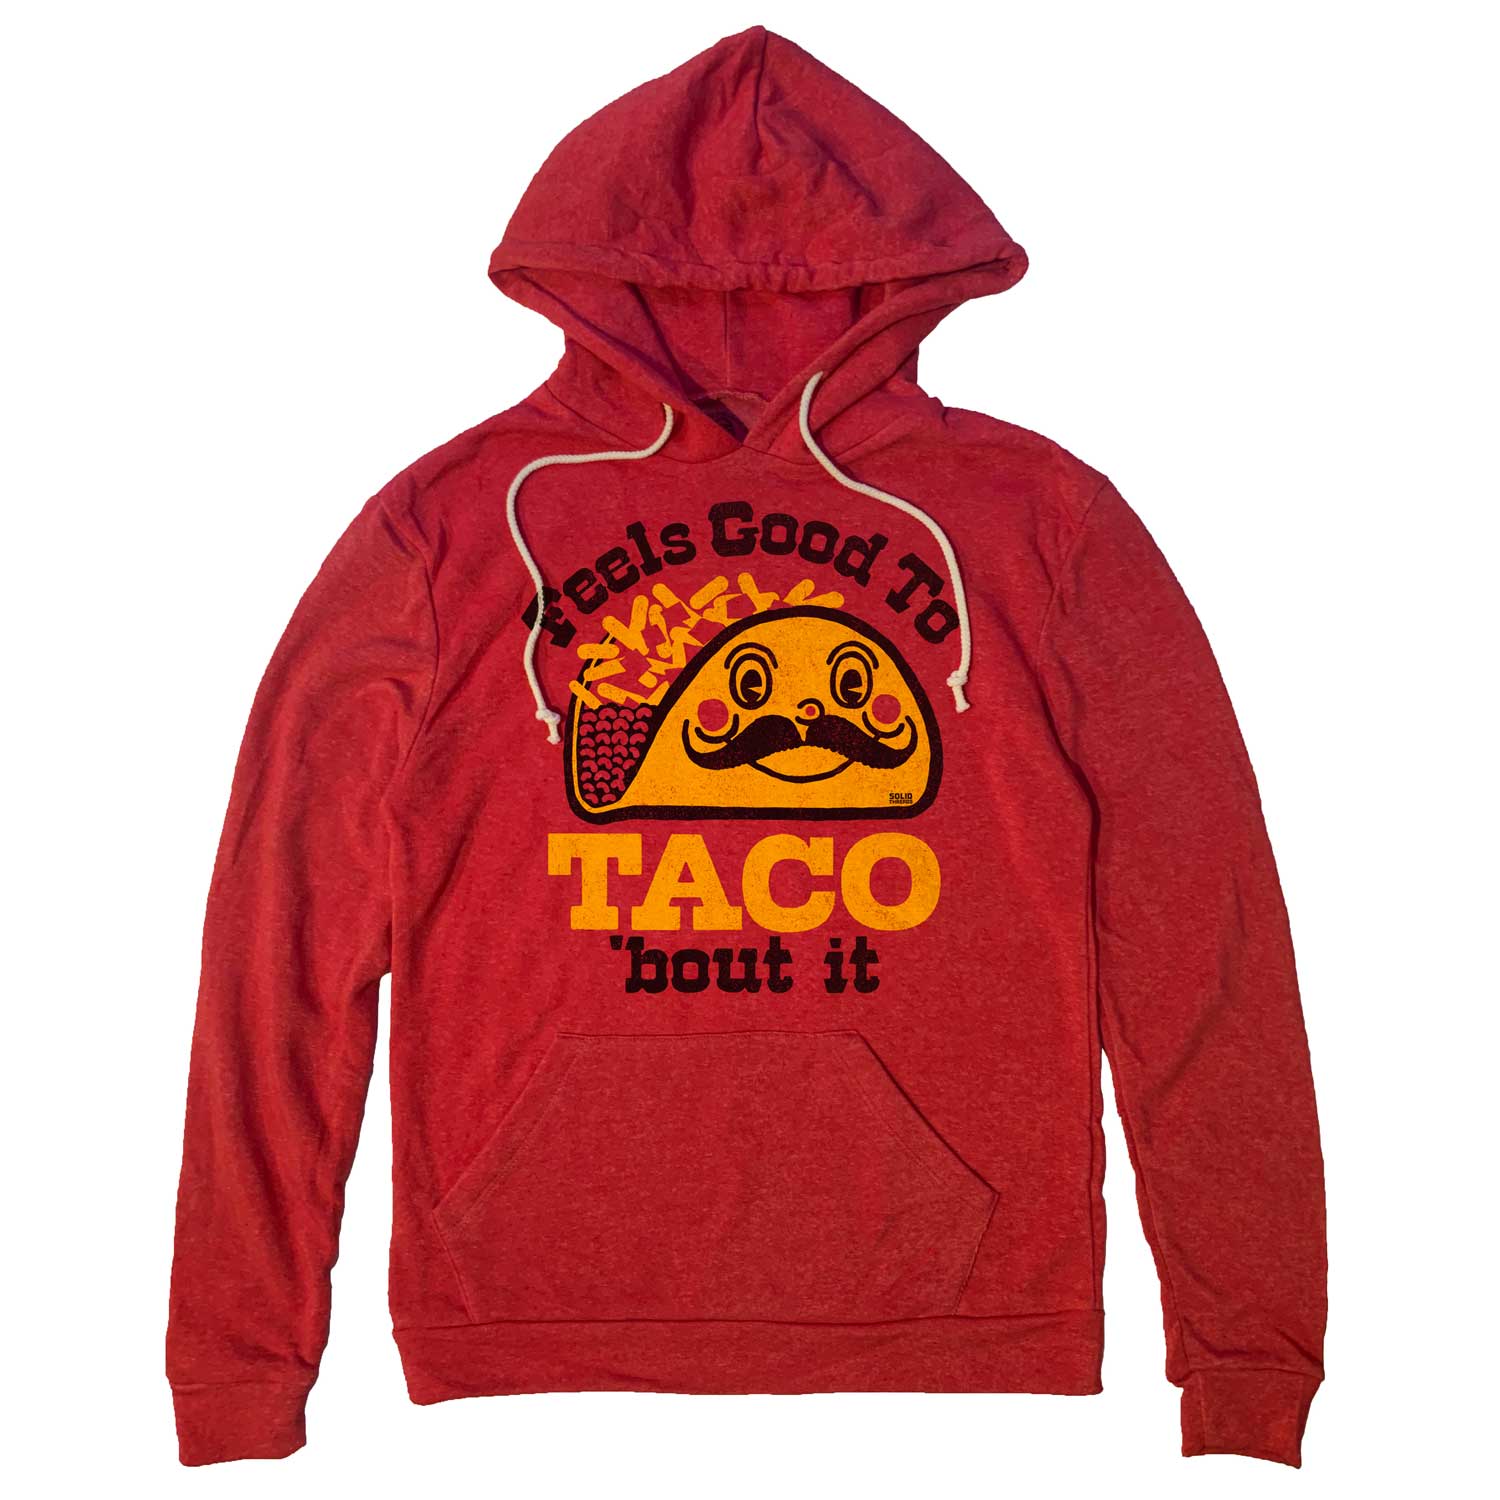 Unisex Taco Bout It Cool Vintage Graphic Hoodie | Funny Foodie Sweatshirt | Solid Threads